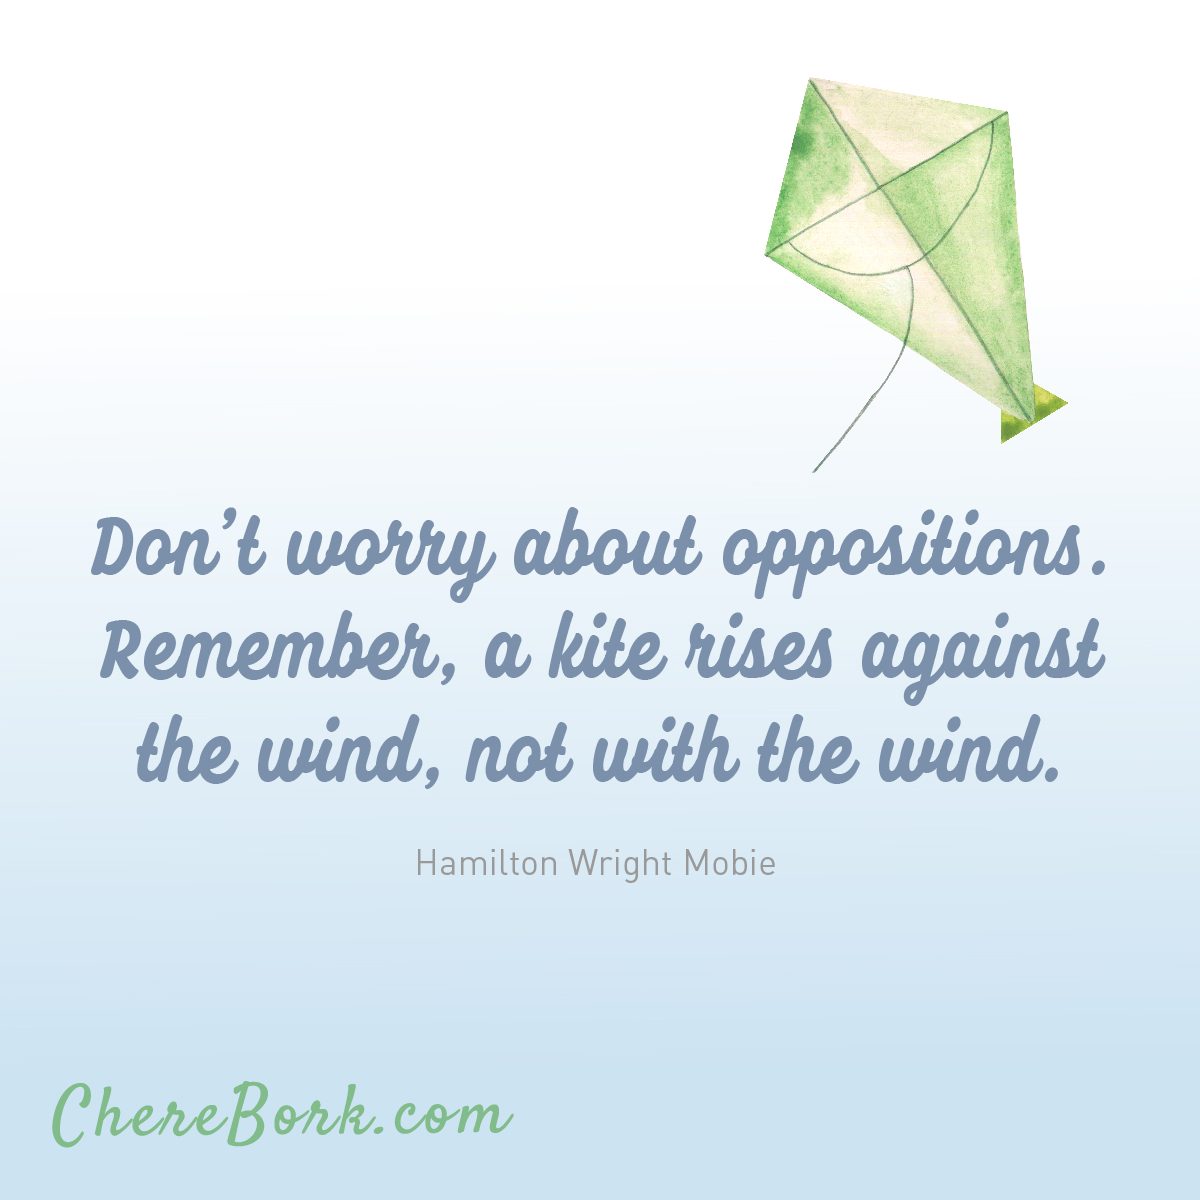 Don't worry about oppositions. Remember, a kite rises against the wind, not with the wind. -Hamilton Wright Mobie